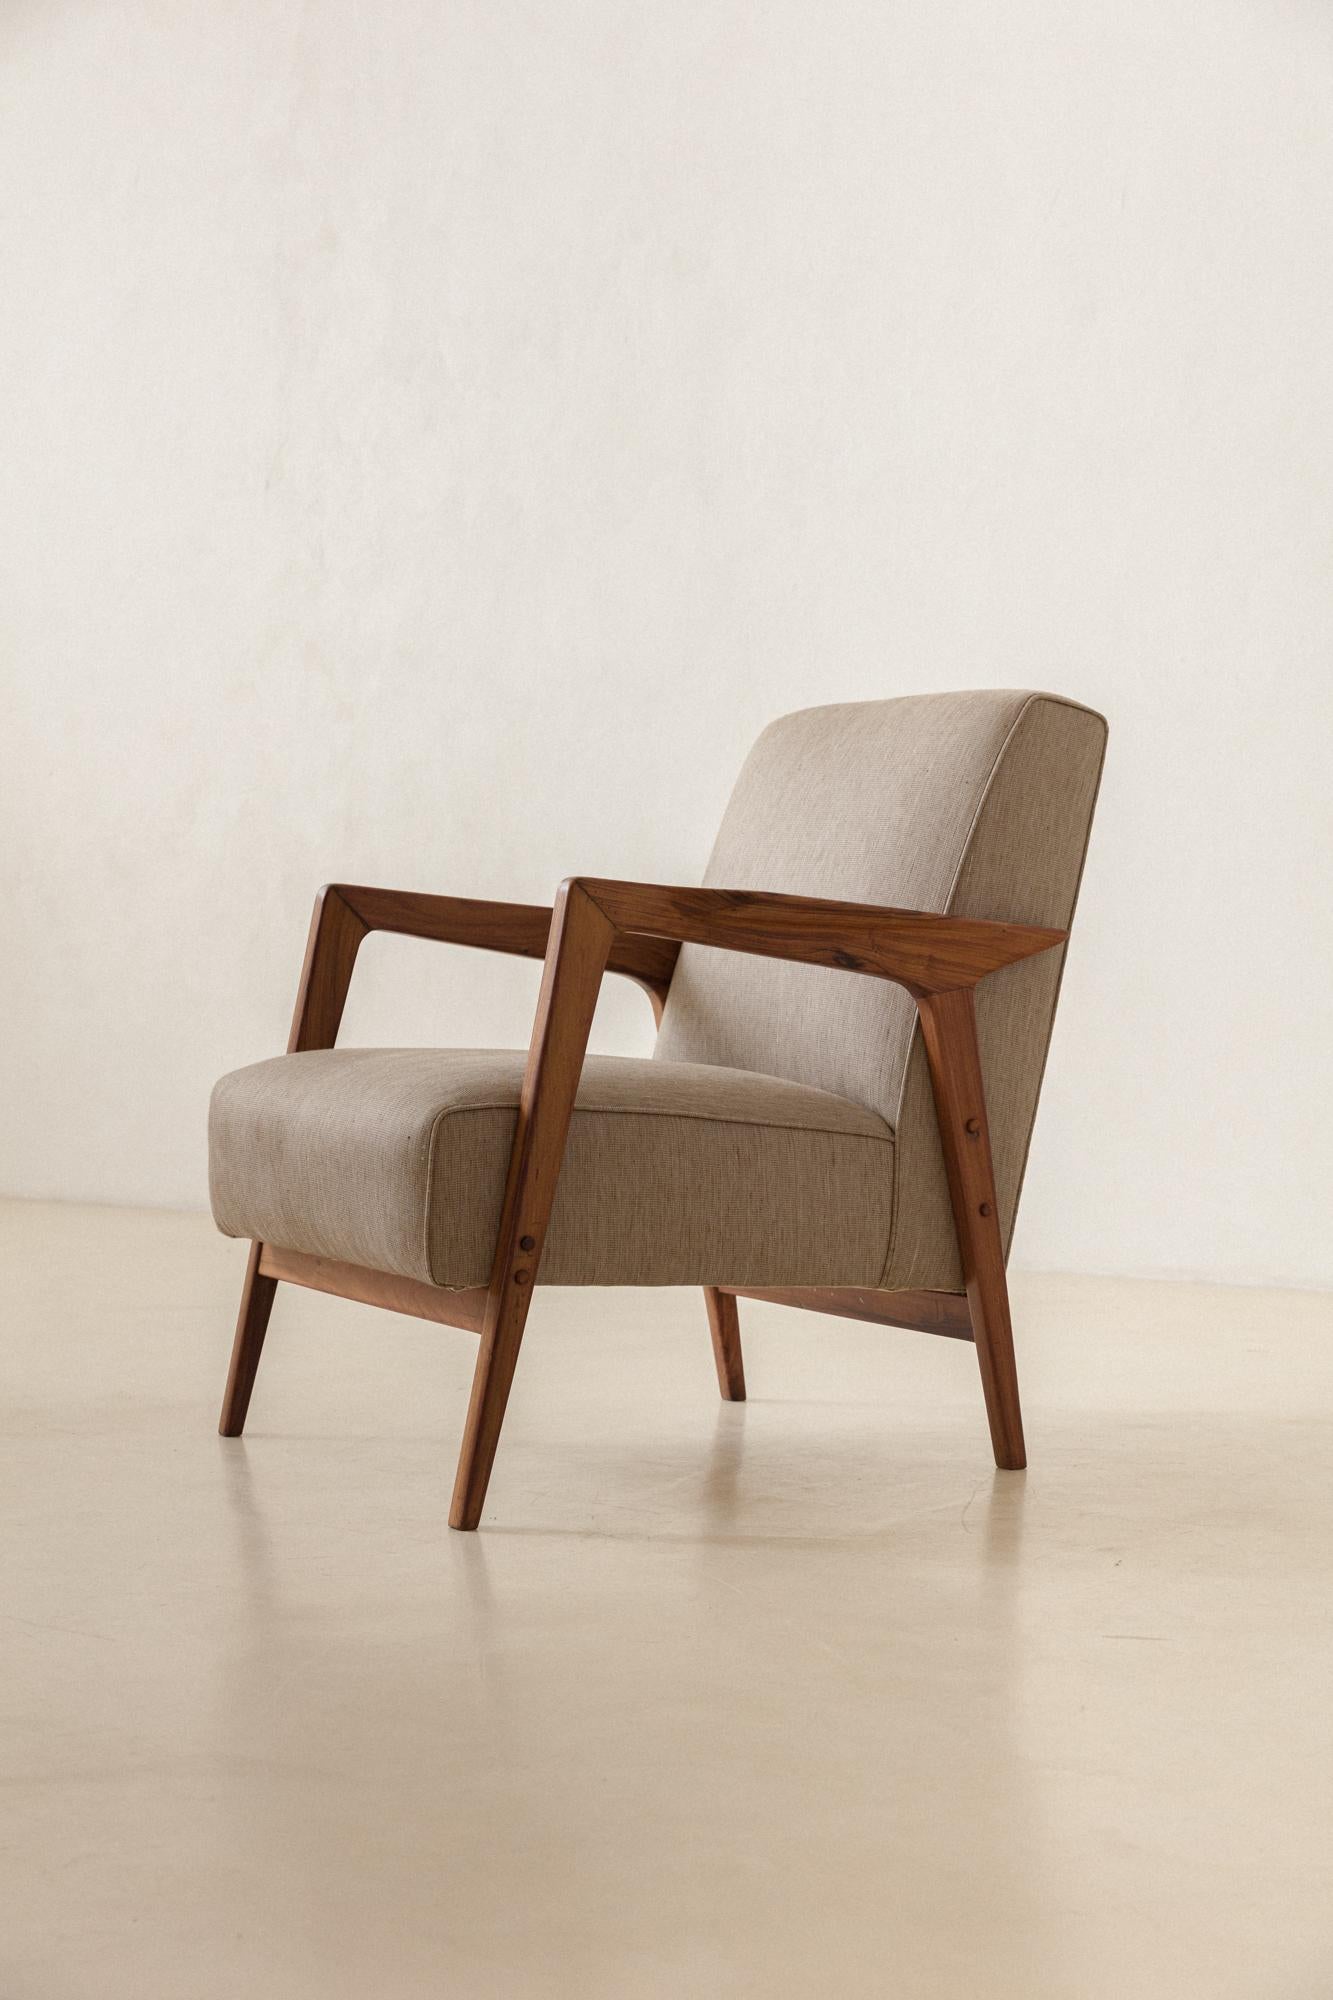 Pair of Armchairs from Hotel Nacional in Brasilia, c. 1960, Midcentury Brazilian For Sale 2